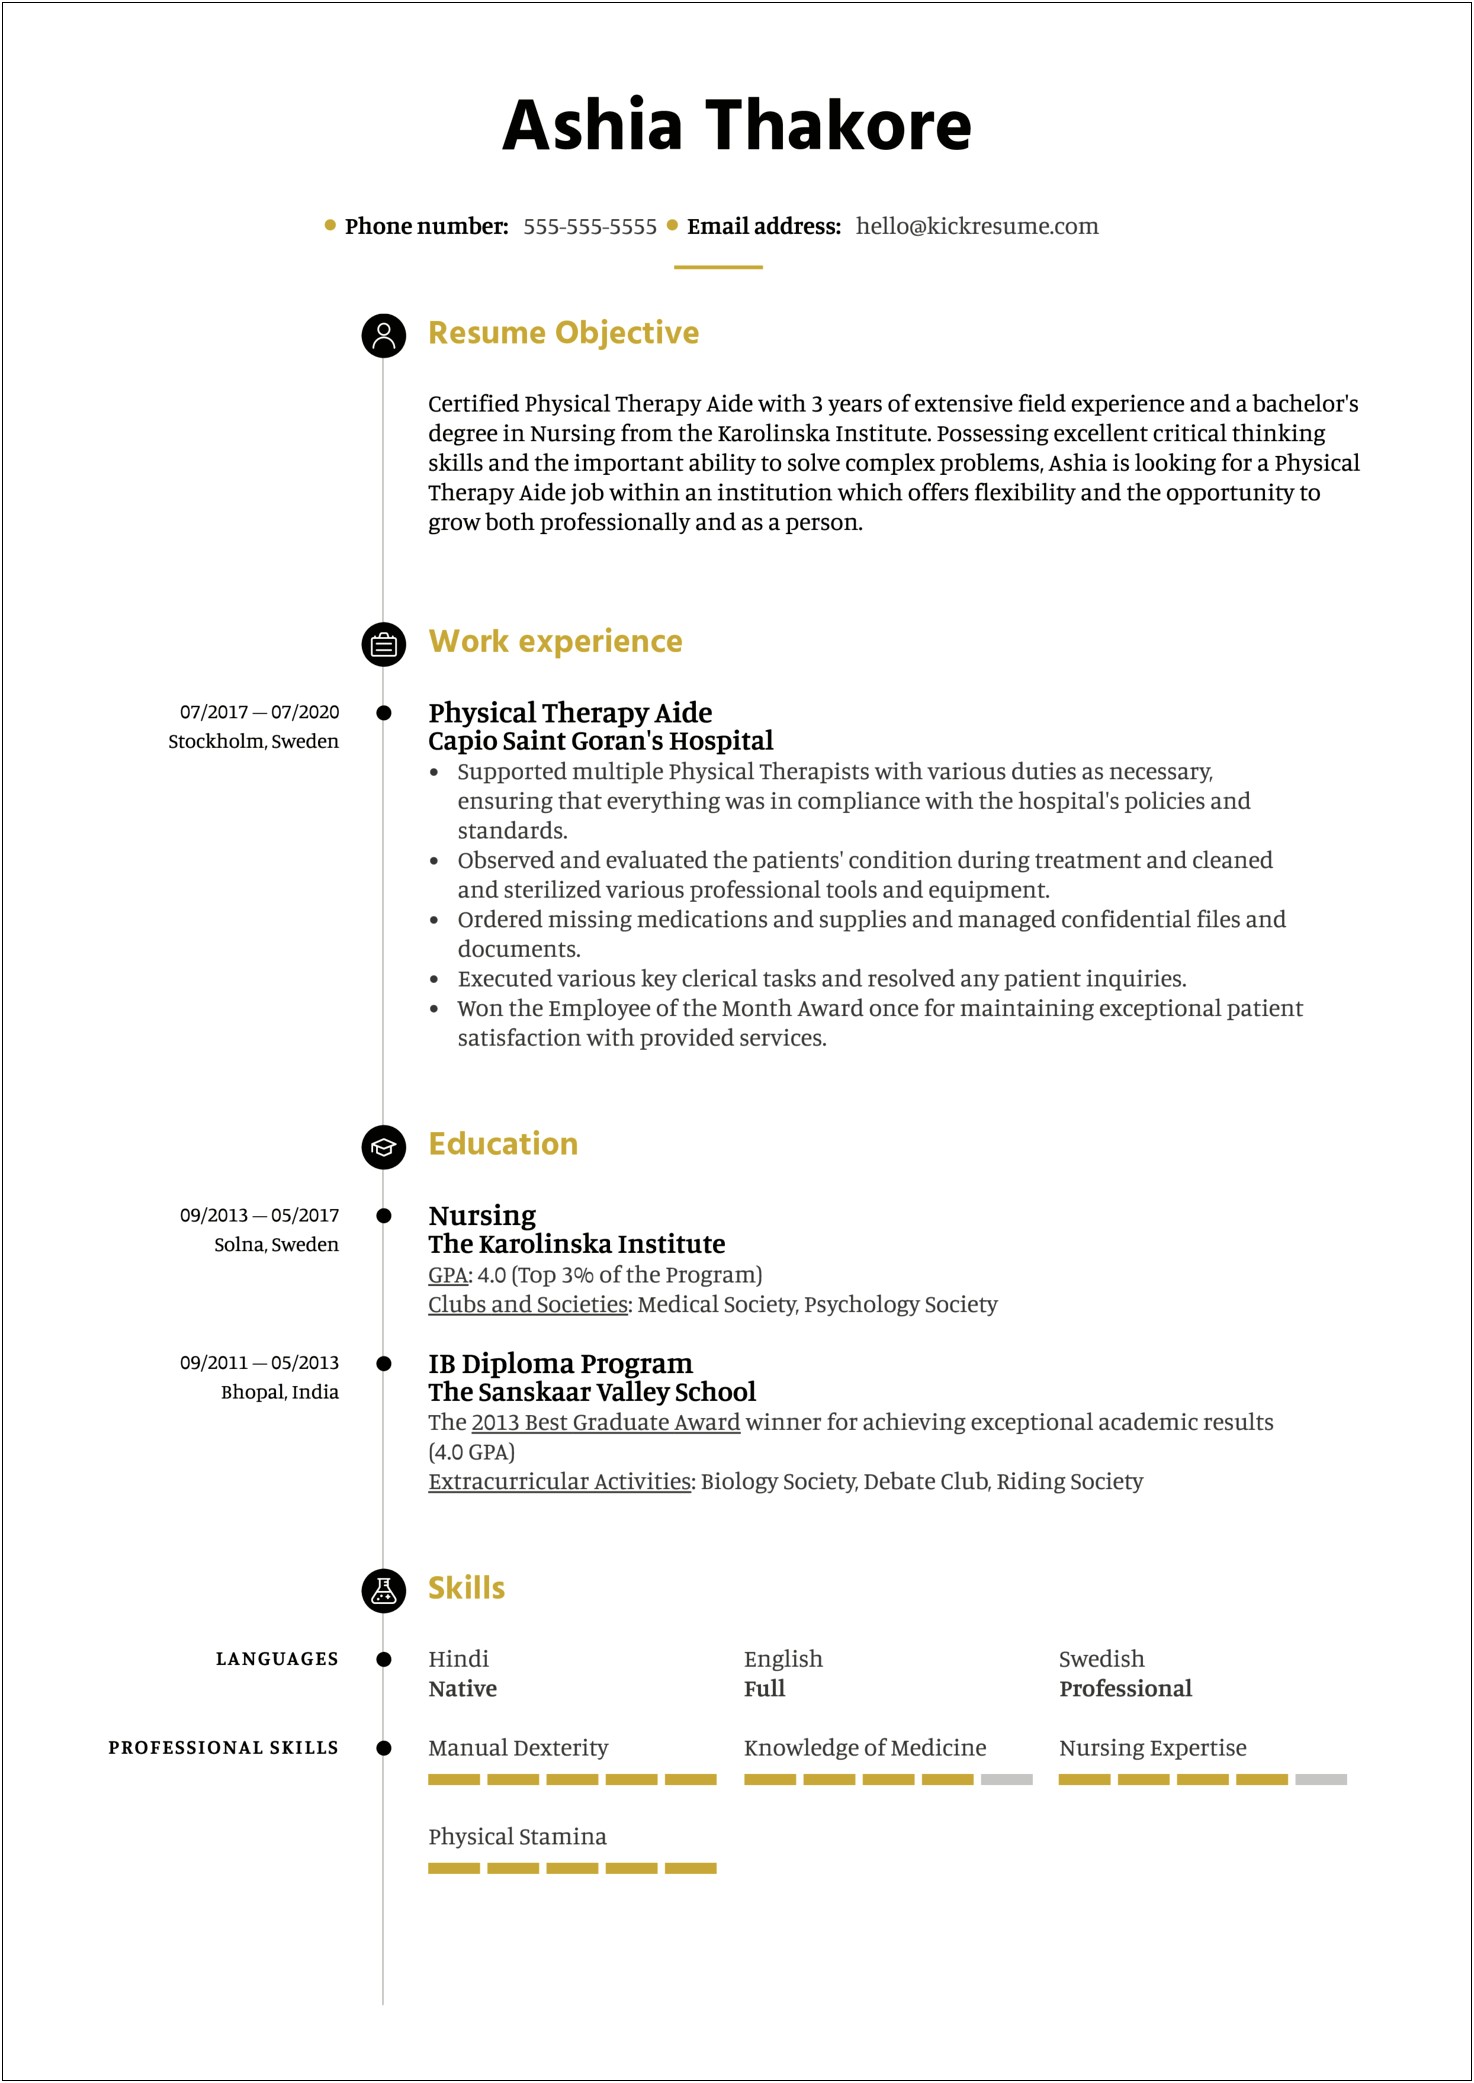 Example Resume For Physical Therapy Aide